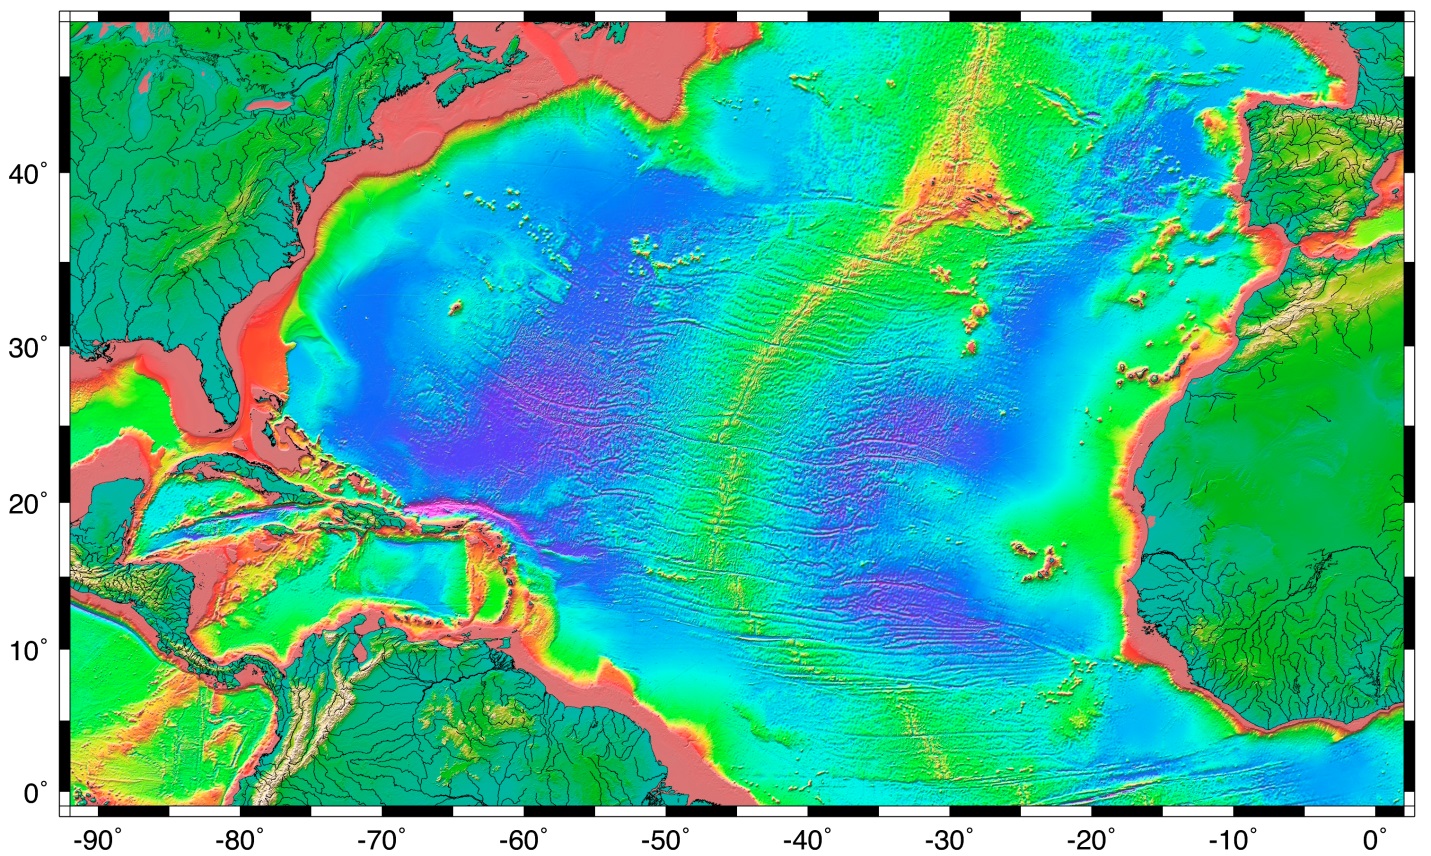 Figure 18.2 The topography of the Atlantic Ocean sea floor between 0° and 50° north. Red and yellow colours indicate less than 2,000 m depth; green less than 3,000 m; blue 4,000 m to 5,000 m; and purple greater than 6,000 m. [from NASA/CNES at: http://topex.ucsd.edu/marine_topo/jpg_images/topo8.jpg]